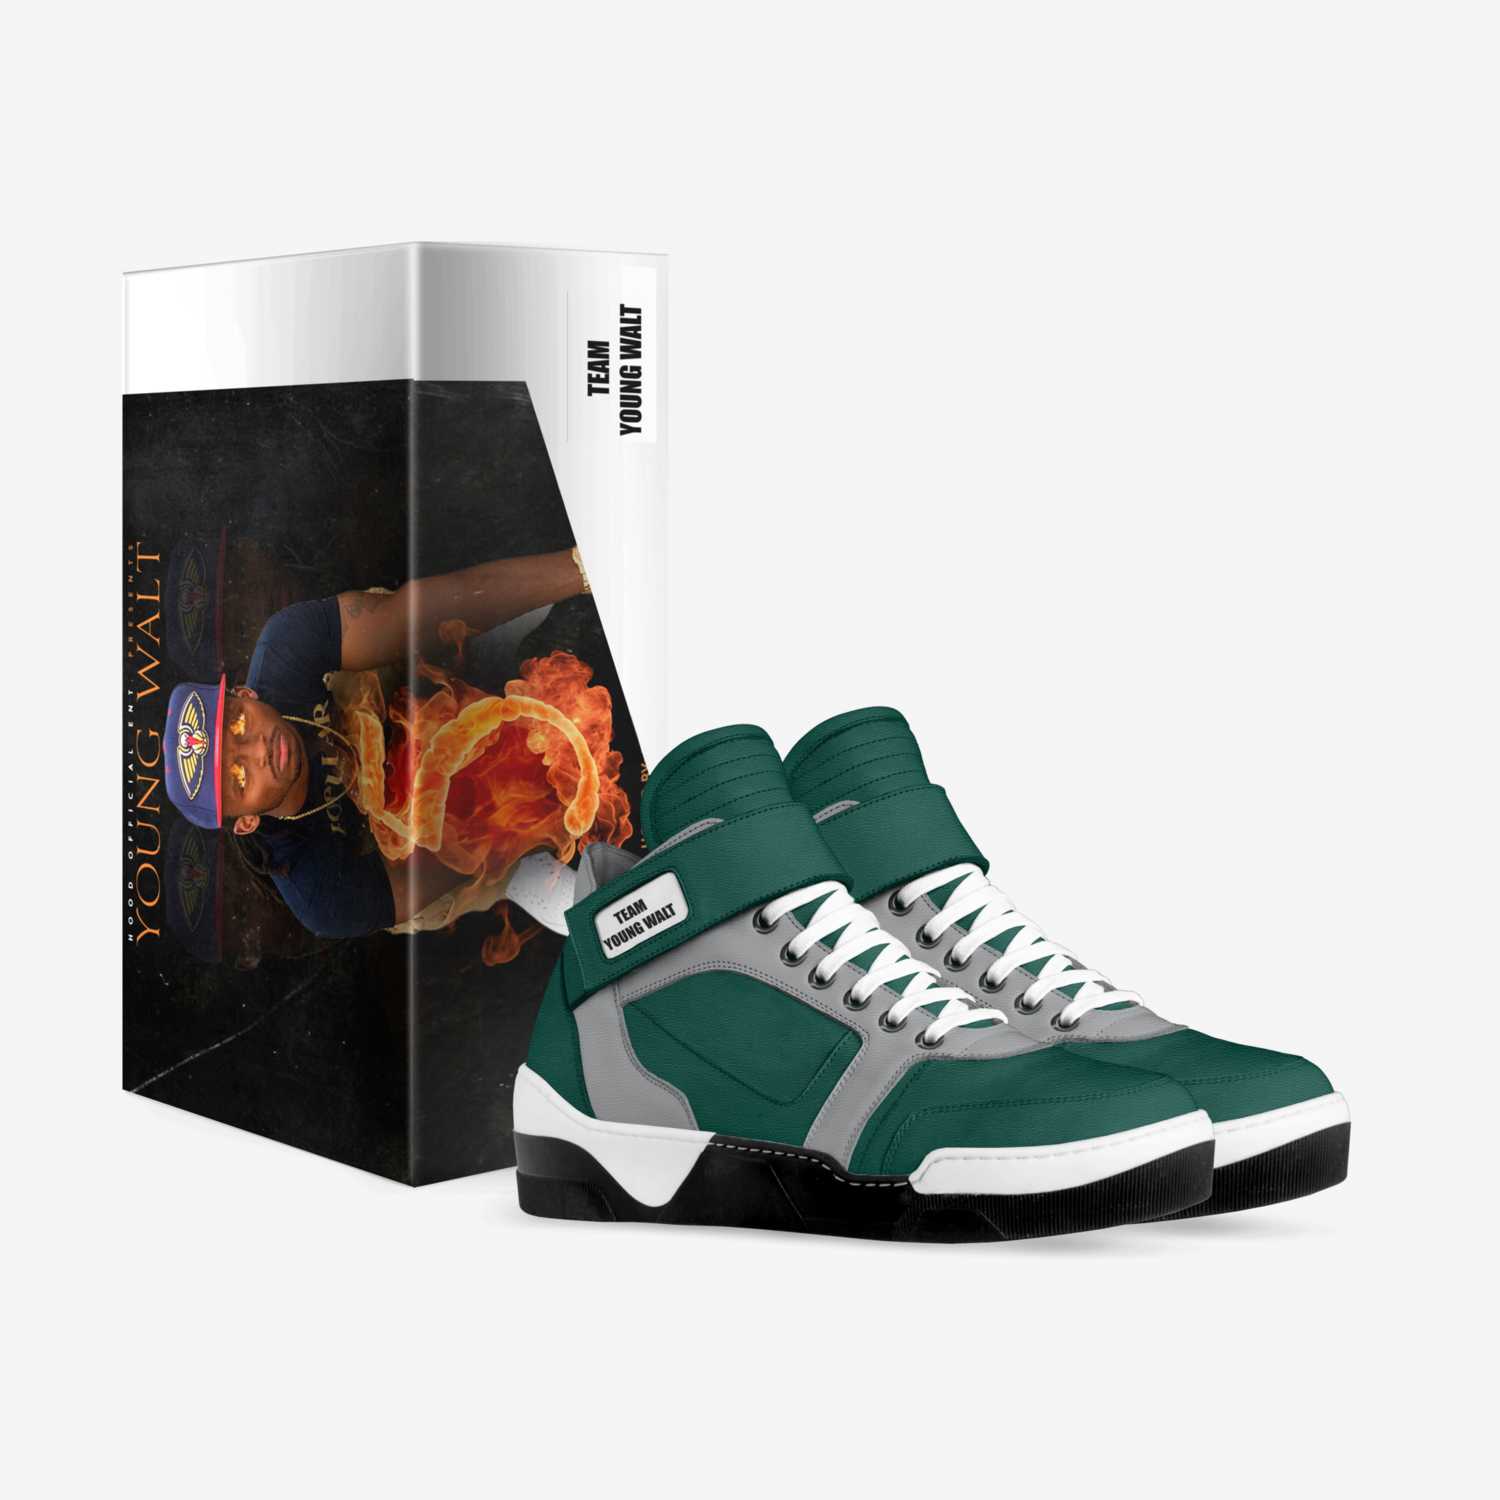 Thug walkers | A Custom Shoe concept by Walter Smith